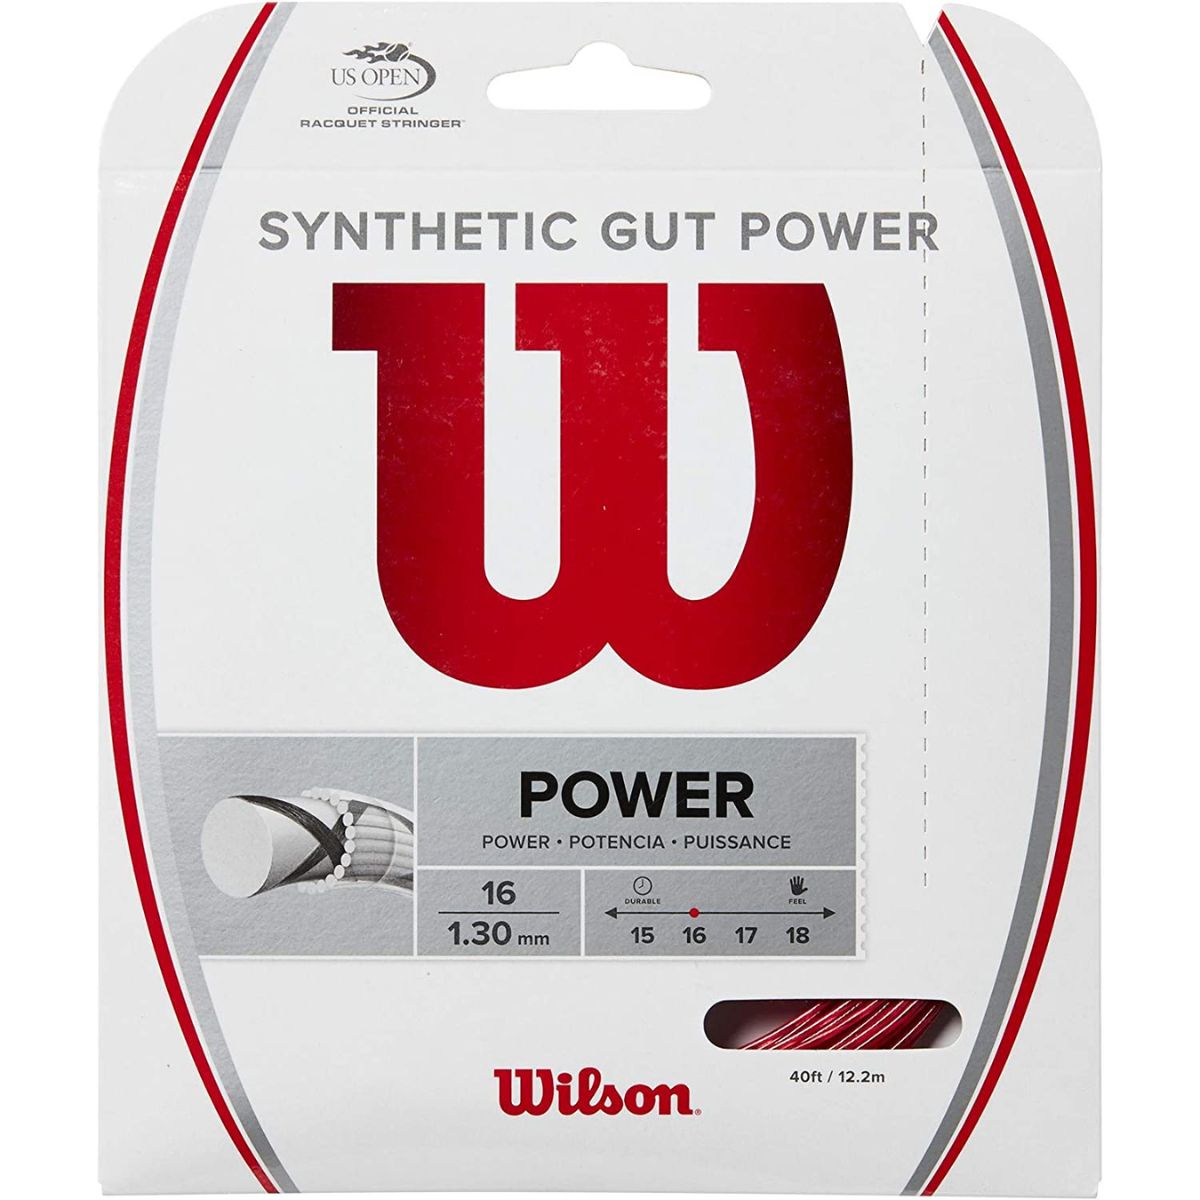 The Best Tennis Strings Options: Wilson Synthetic Gut Power Tennis String